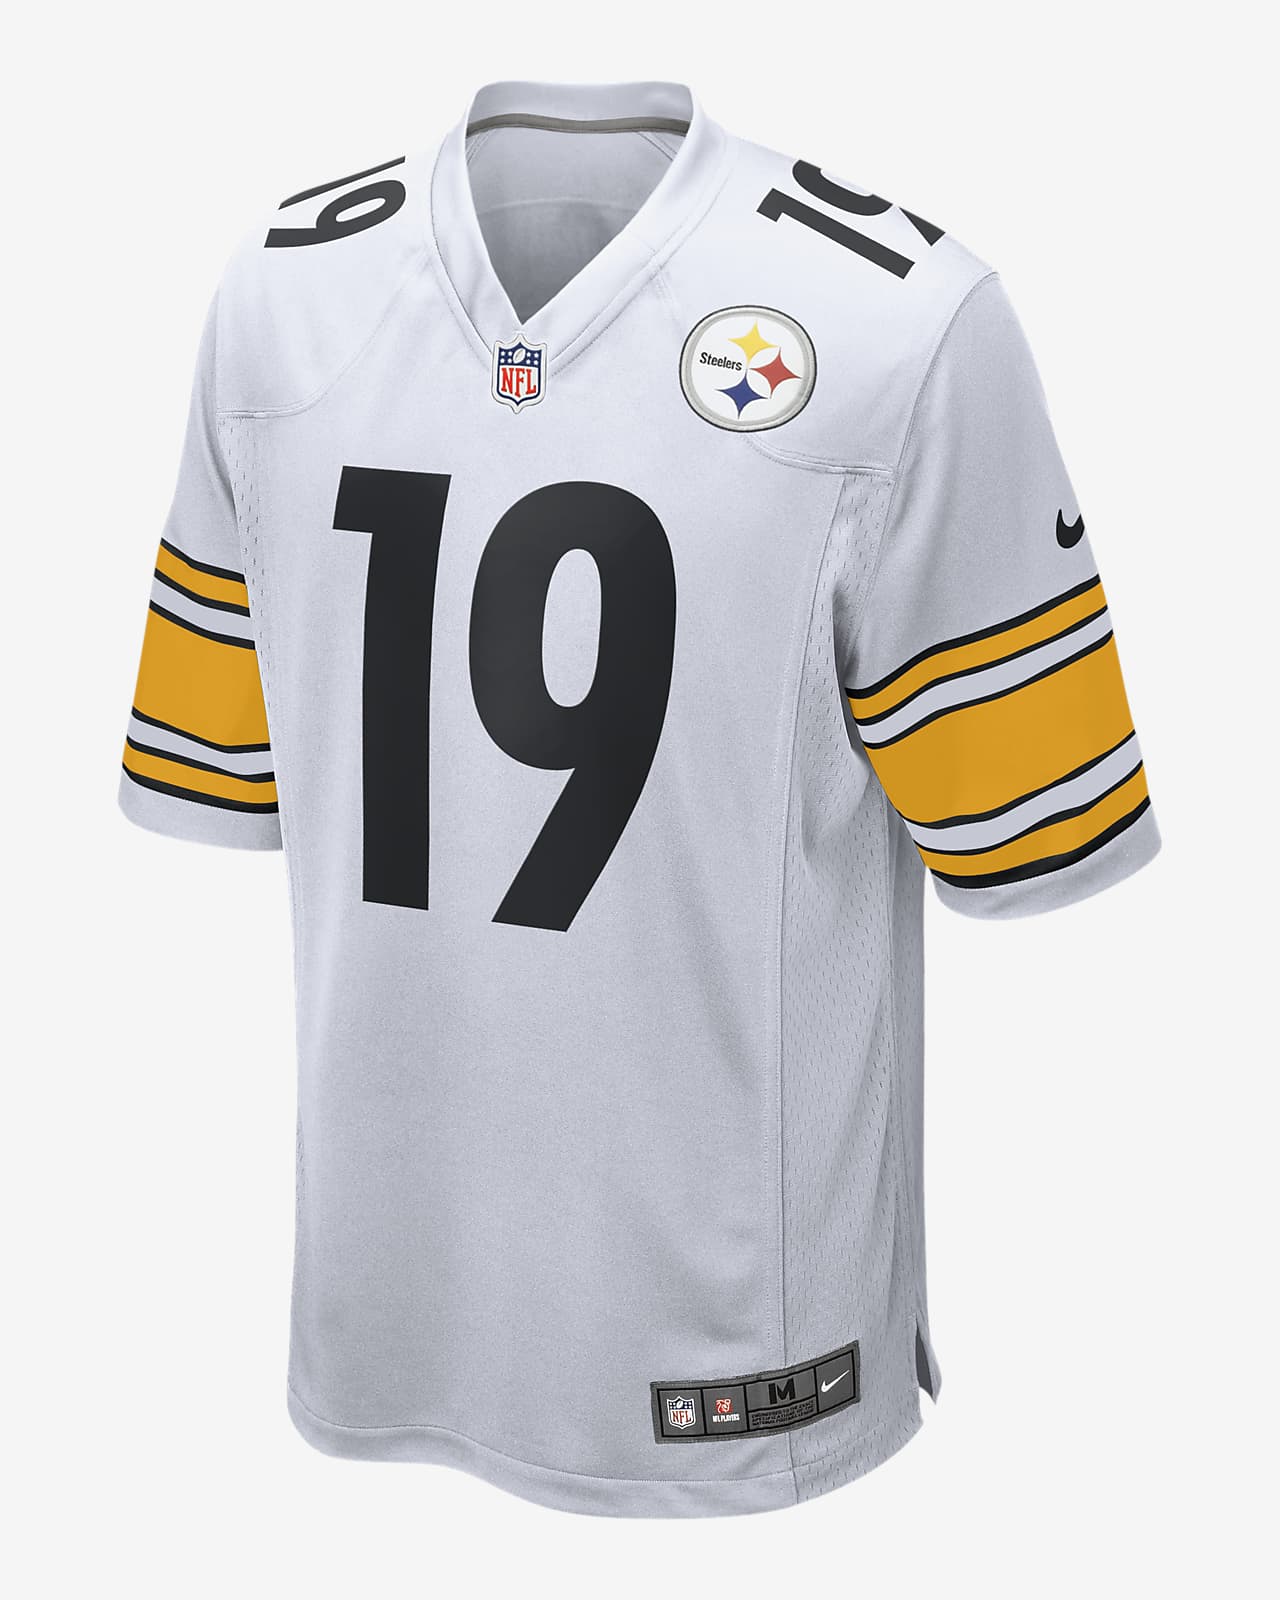 steelers smith schuster jersey